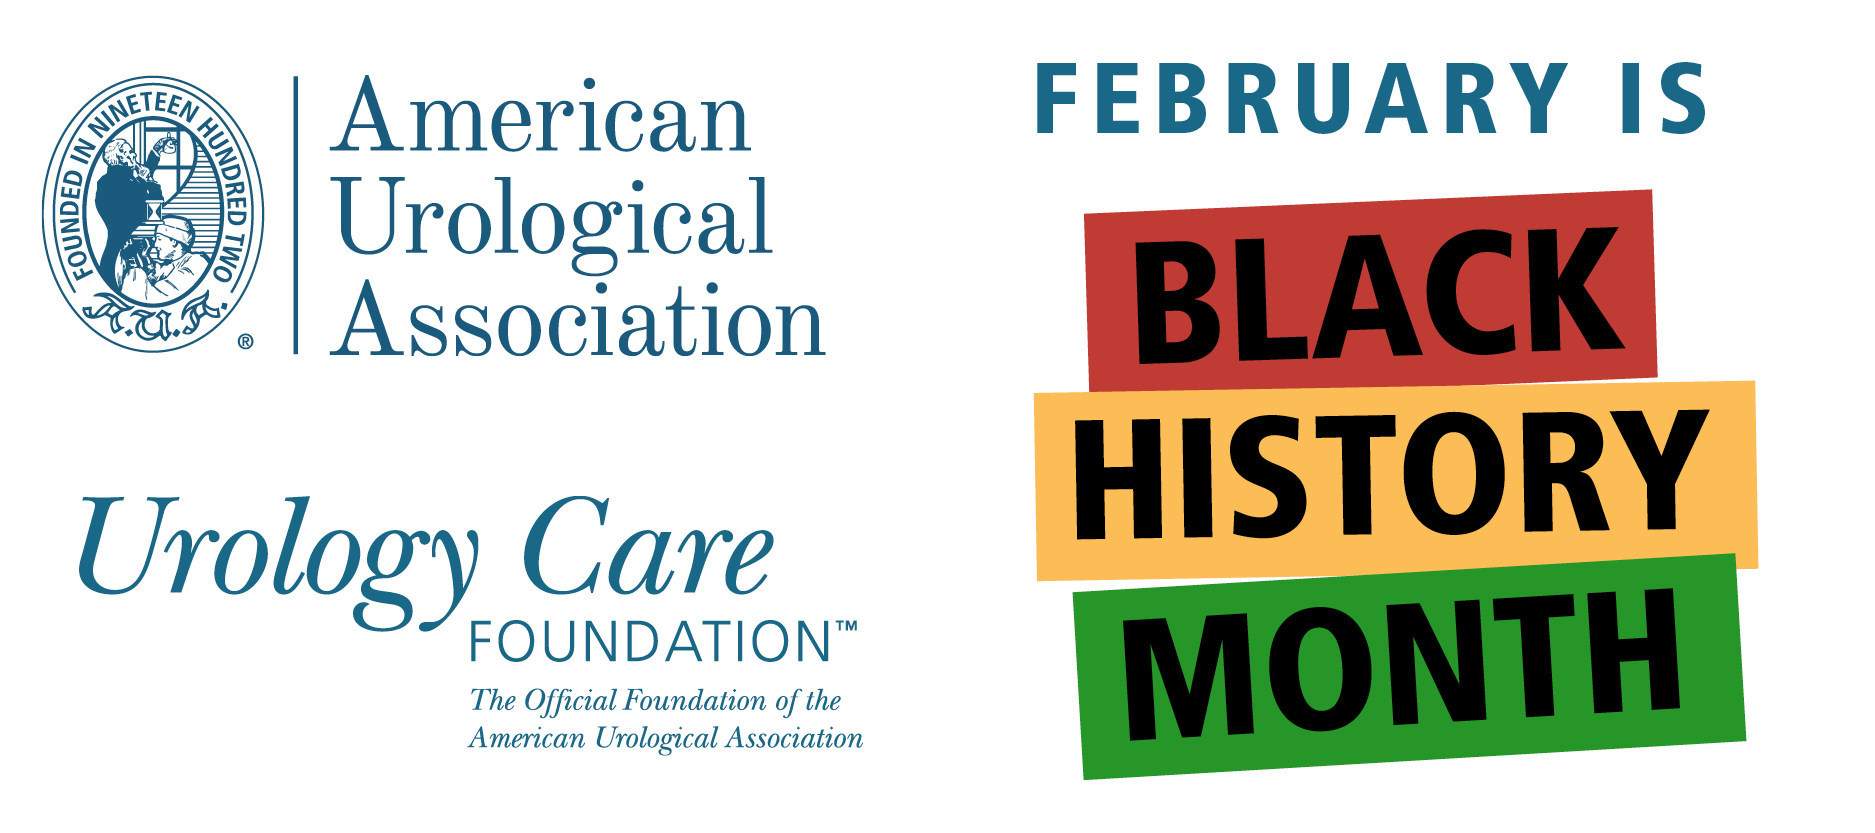 The American Urological Association and the Urology Care Foundation celebrate Black History Month.